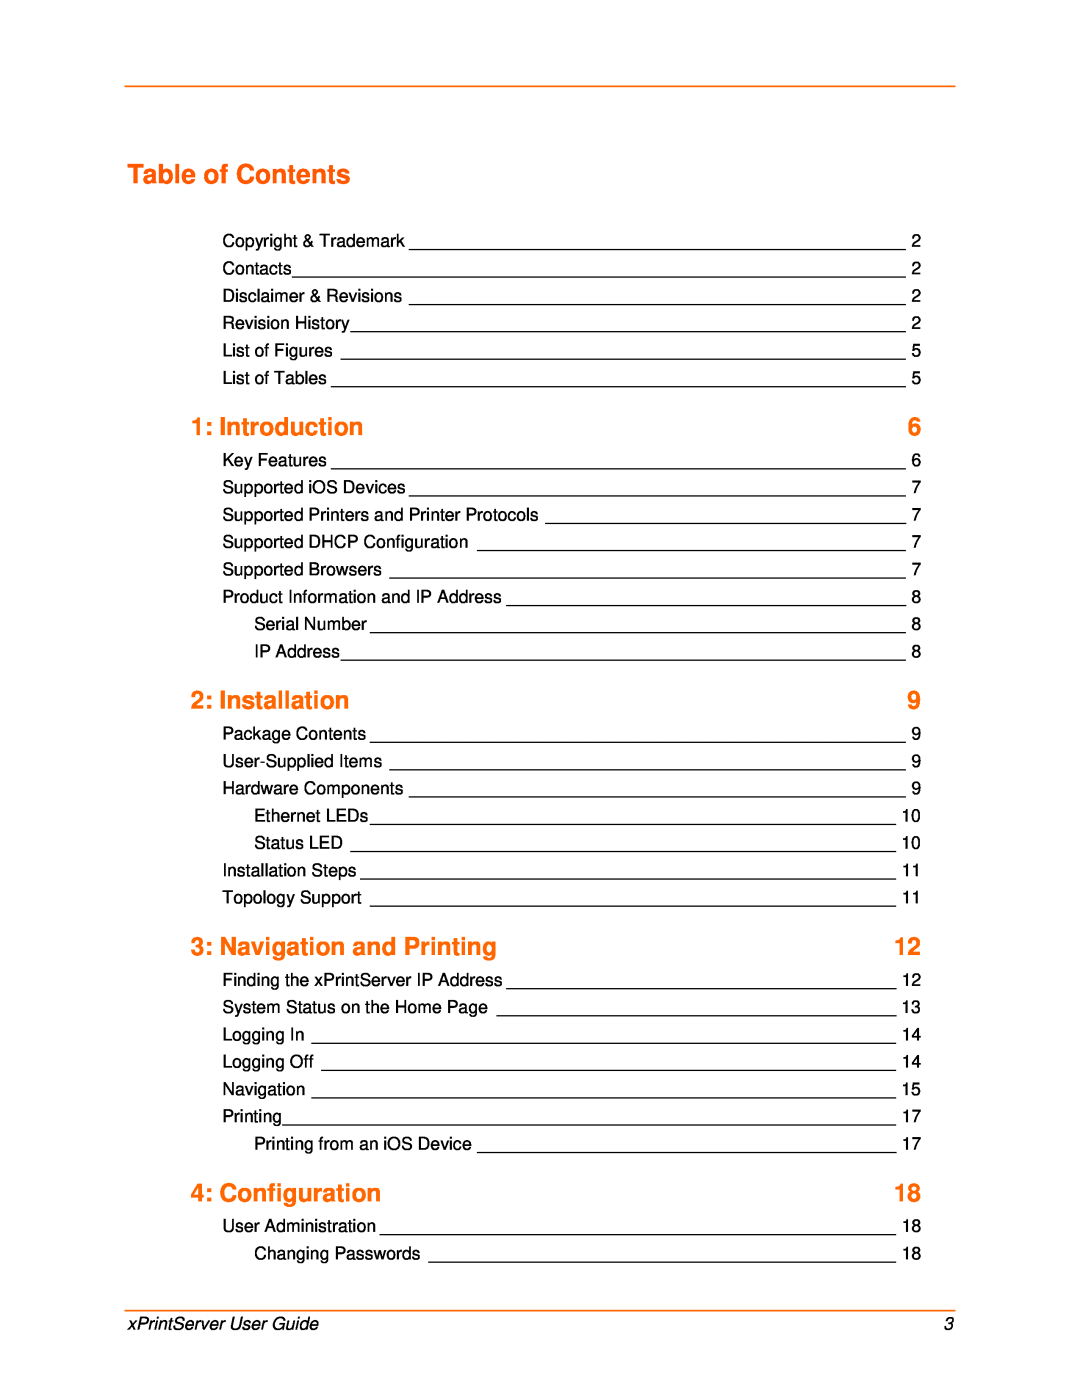 Lantronix 900-603 manual Table of Contents, Introduction, Installation, Navigation and Printing, Configuration 